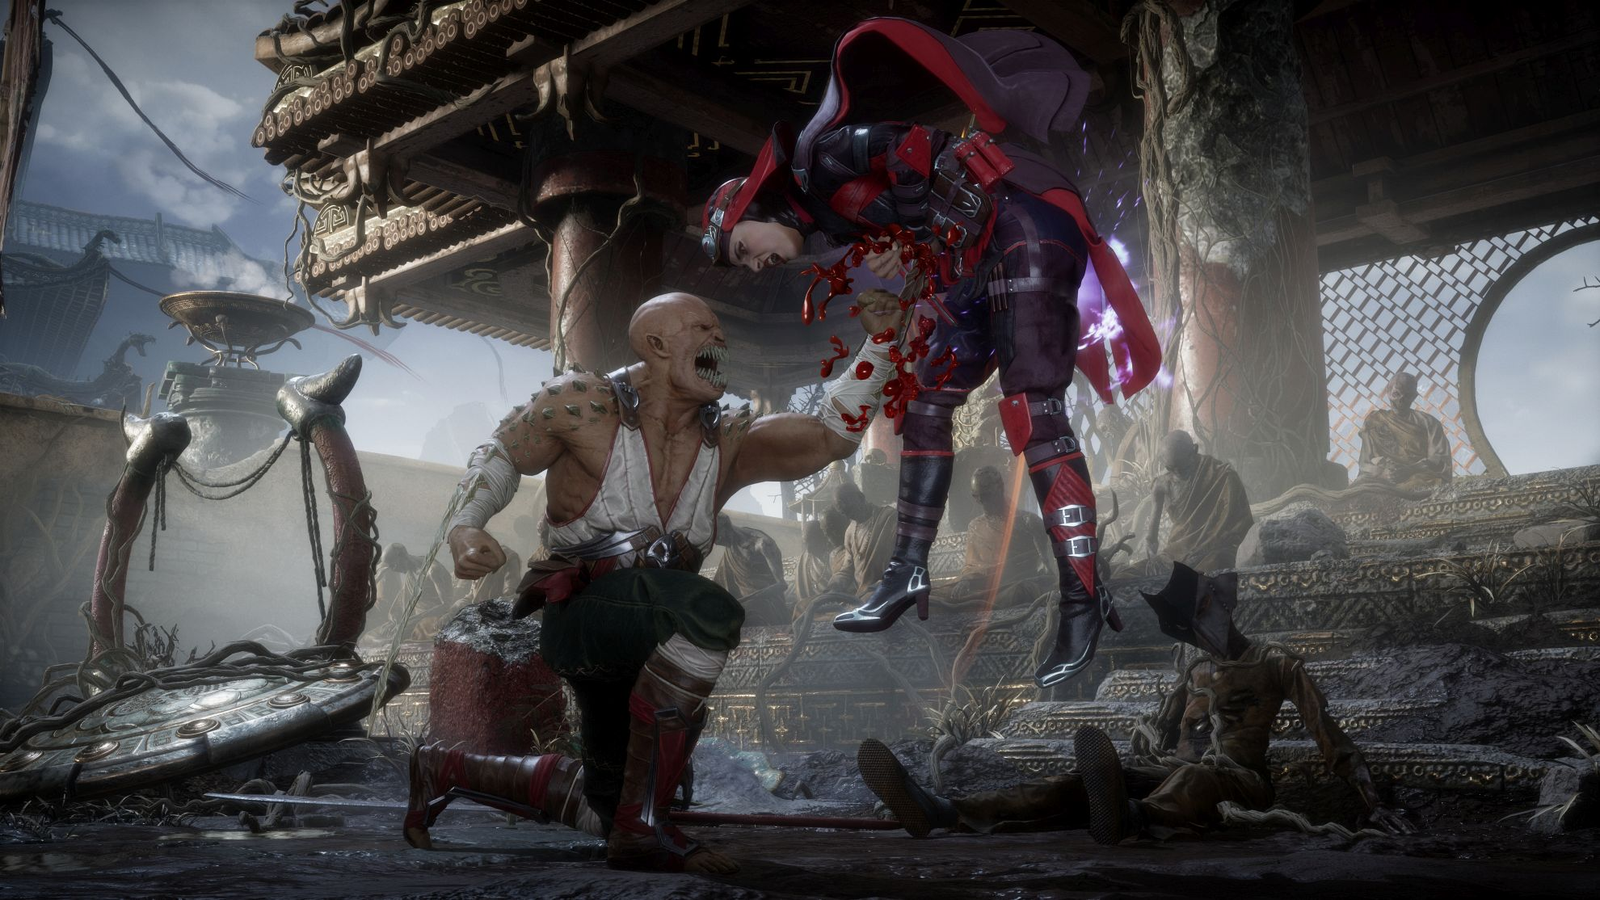 Mortal Kombat' Review: R-Rated Reboot Now as Violent as the Game